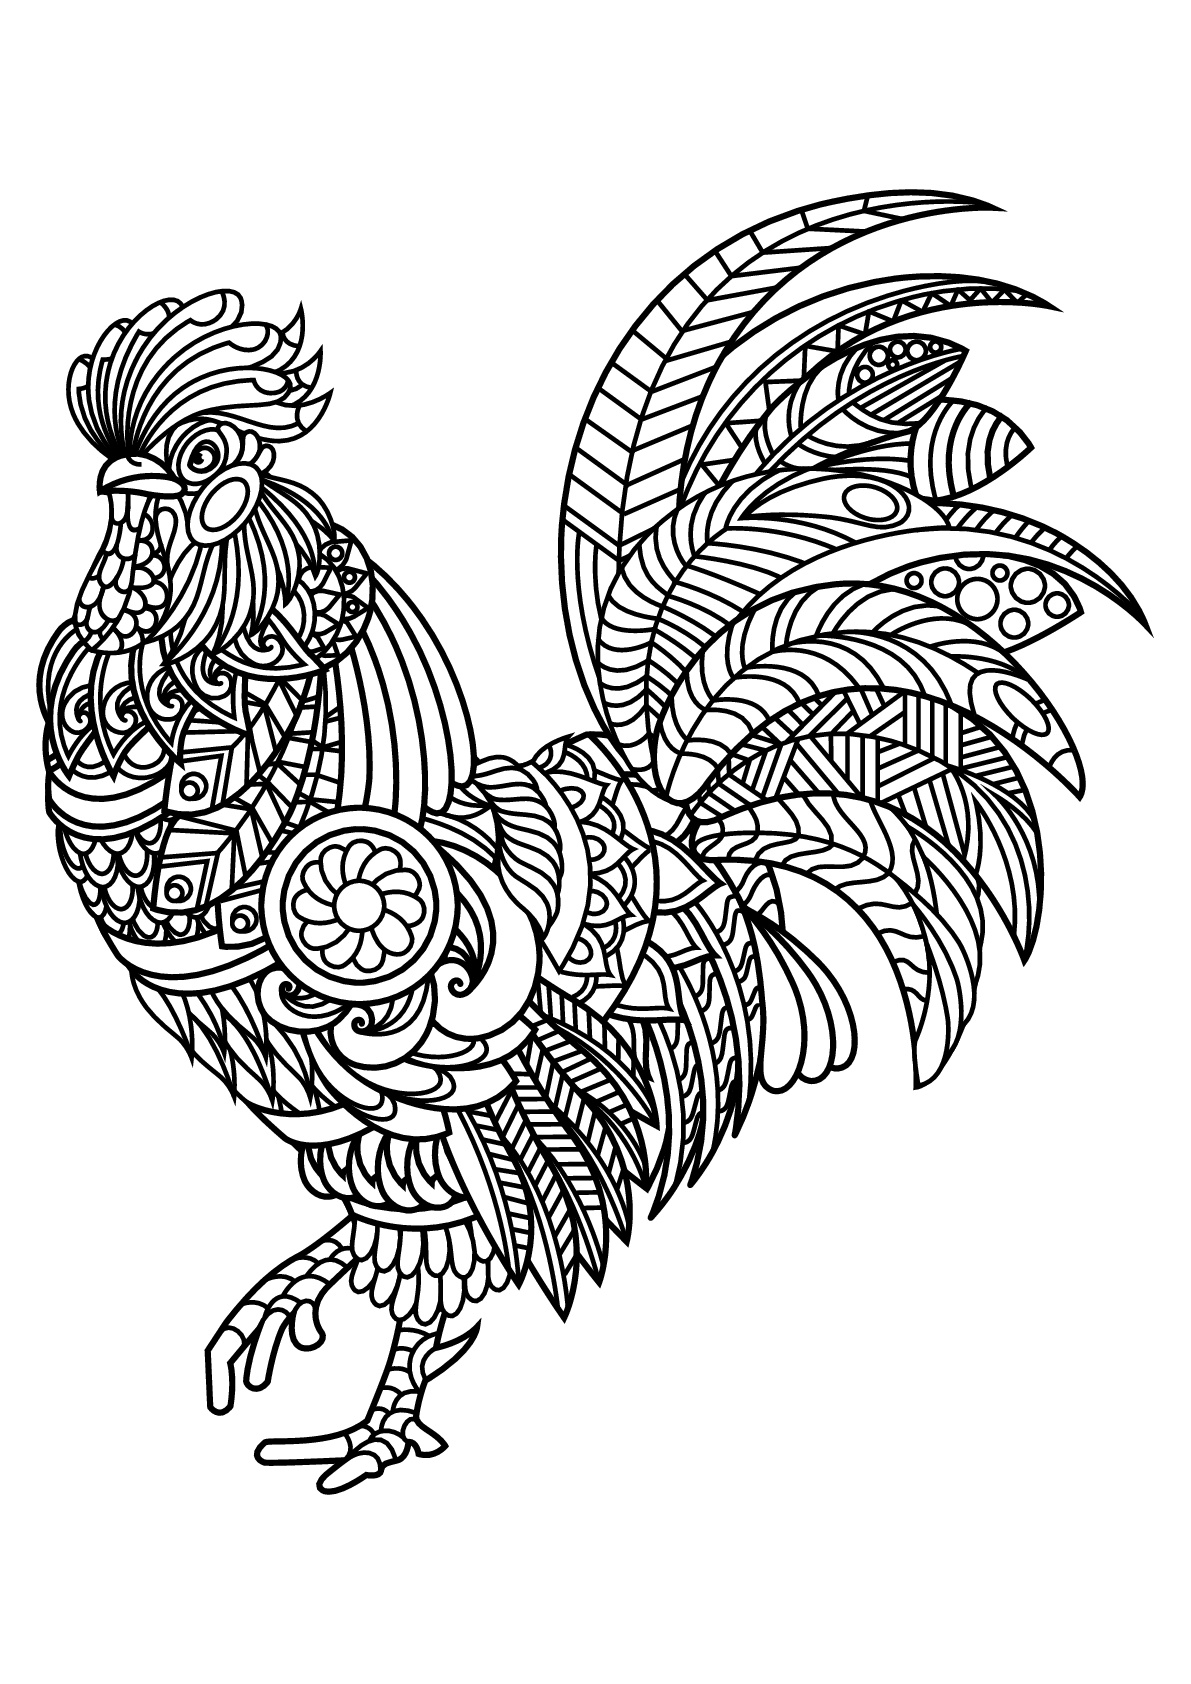 Cock, with complex and beautiful patterns